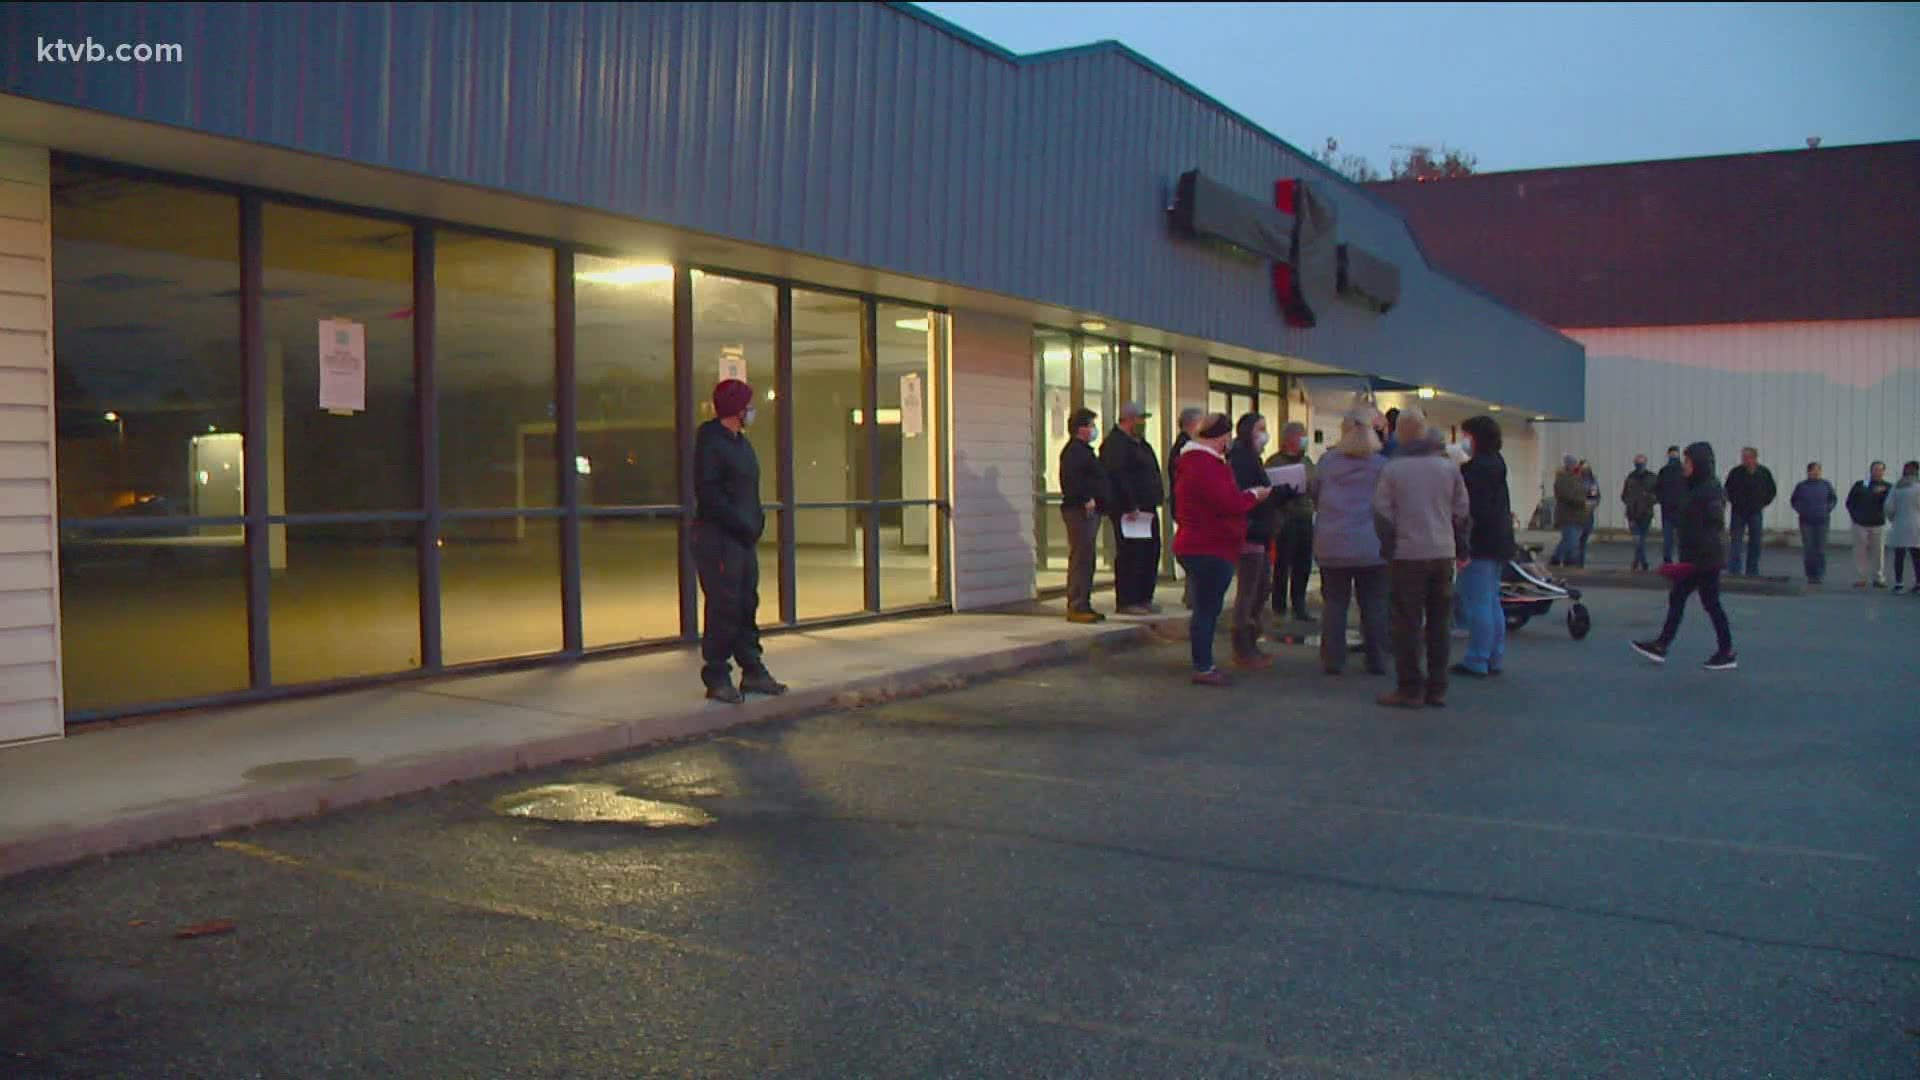 Interfaith Sanctuary is planning to relocate to the old Salvation Army Thrift Store on State Street in Boise. Not everyone is happy about the plan.